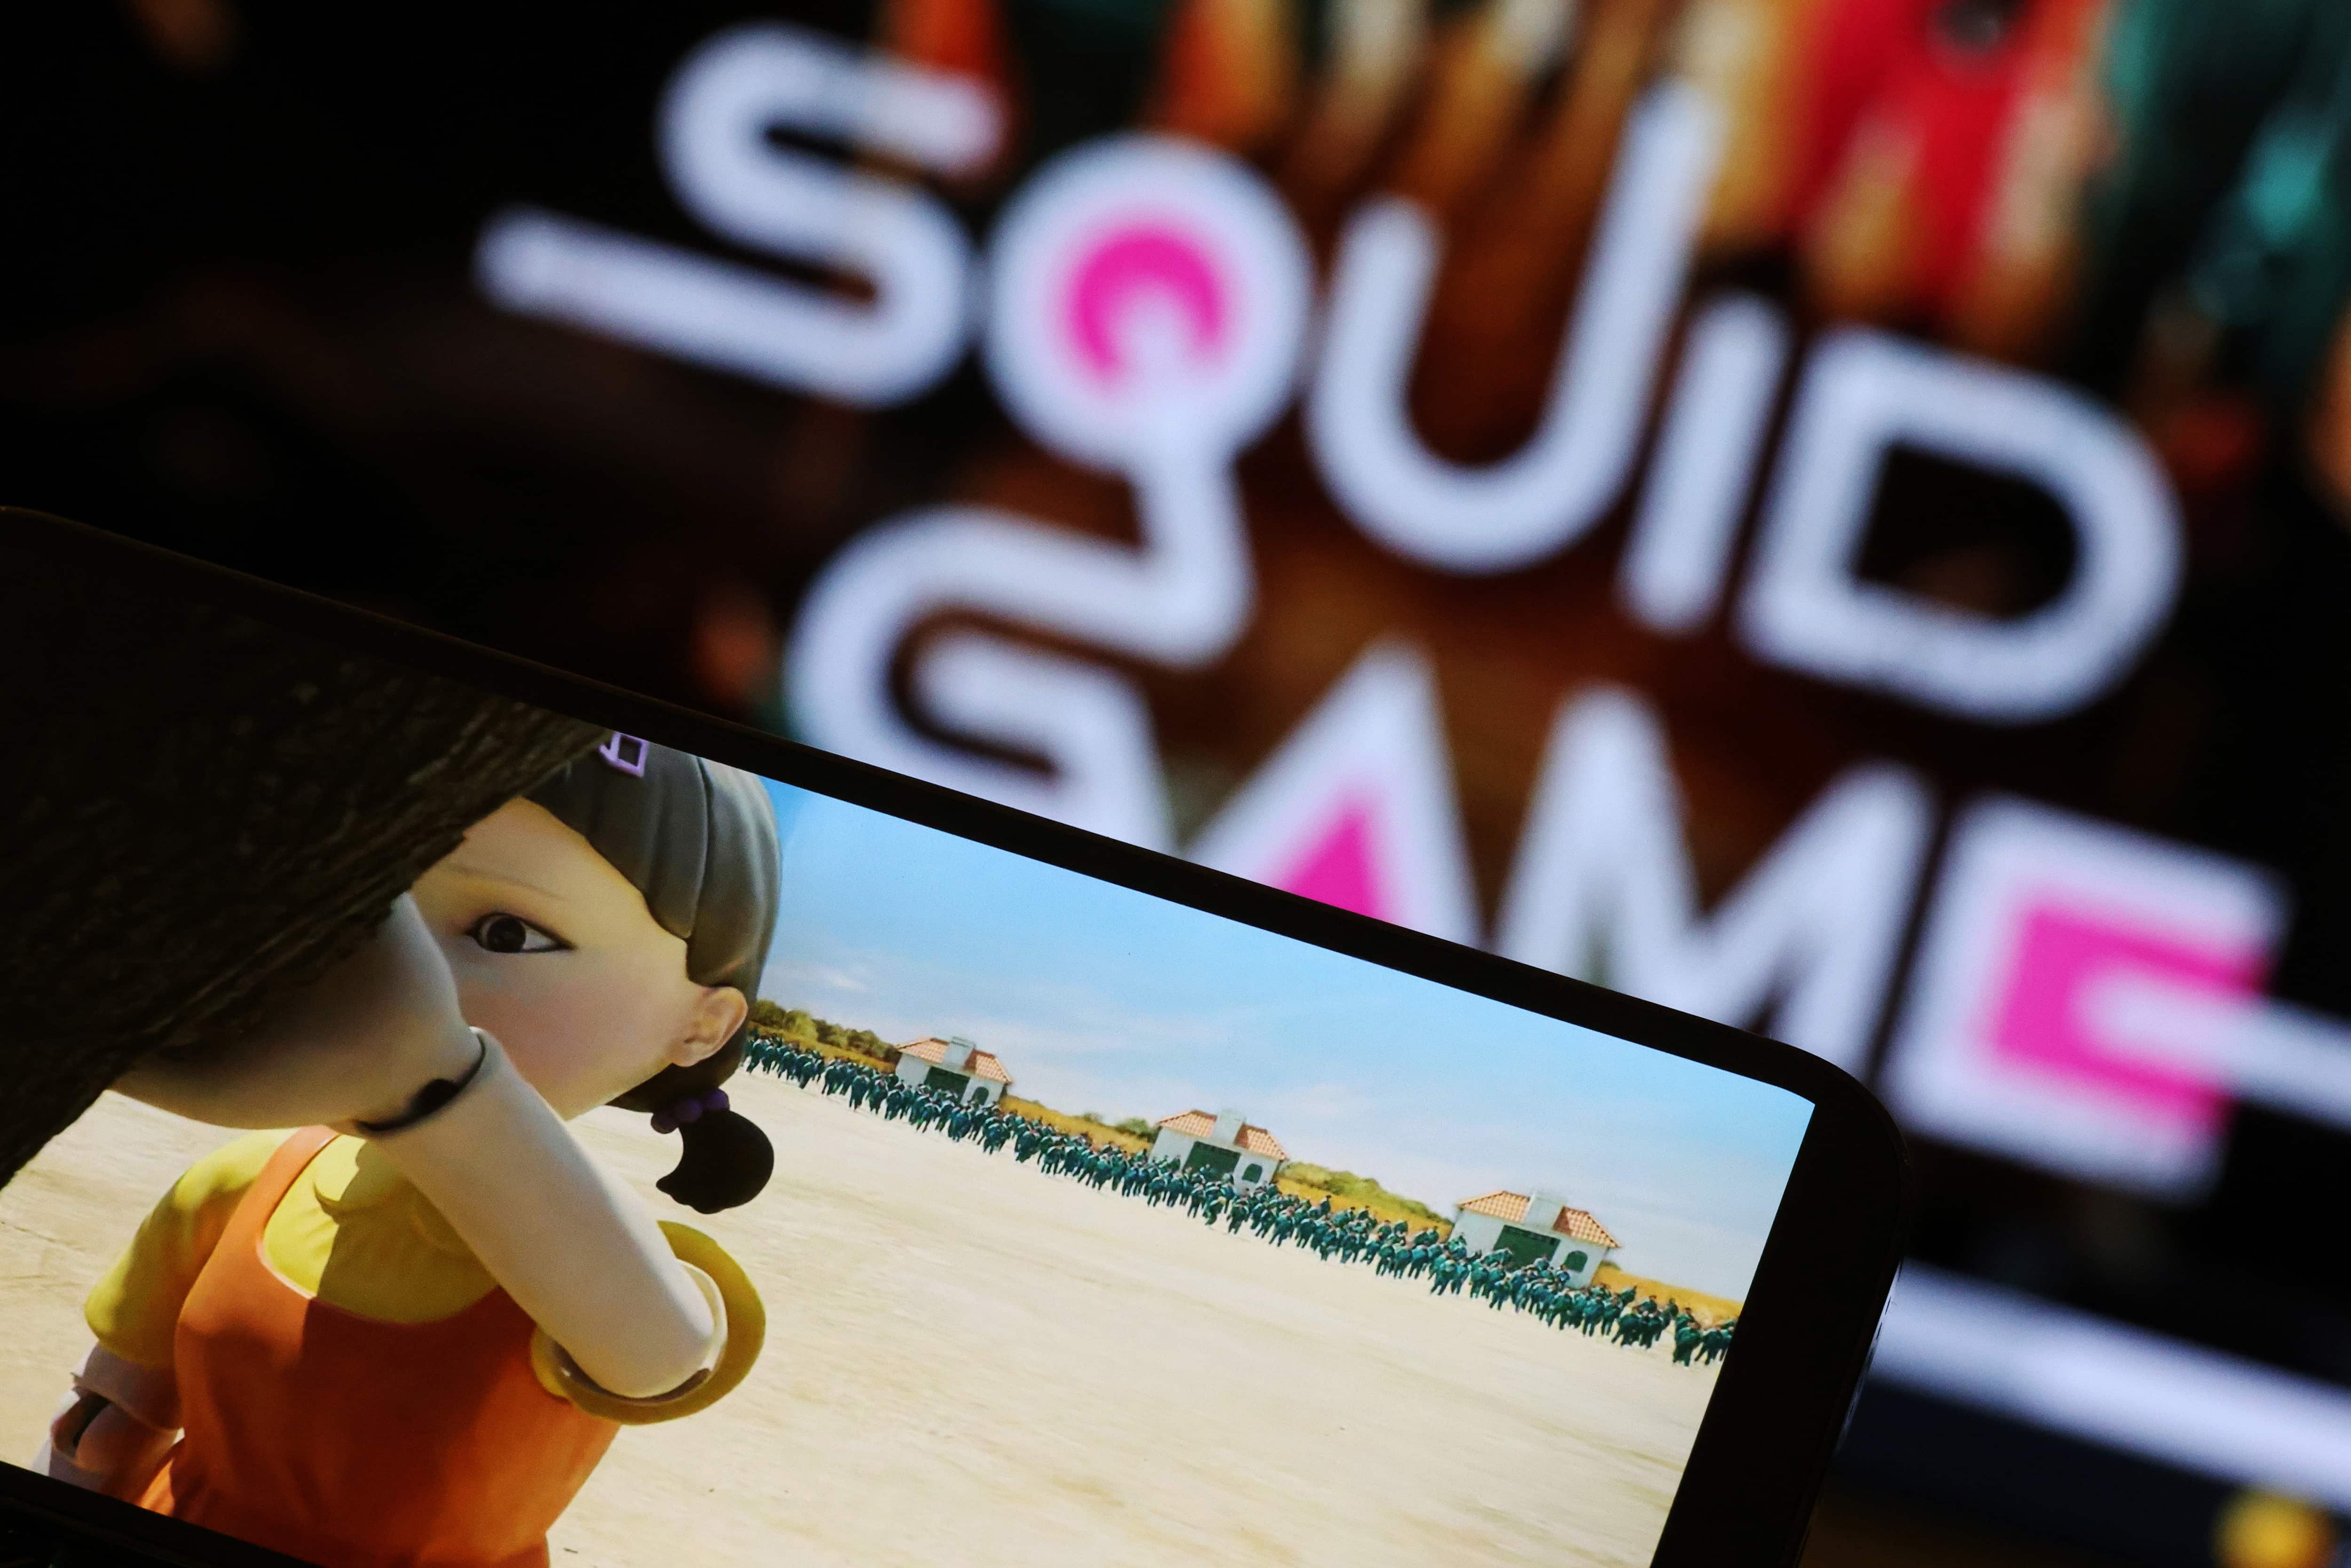 Squid Game video game announced by Netflix